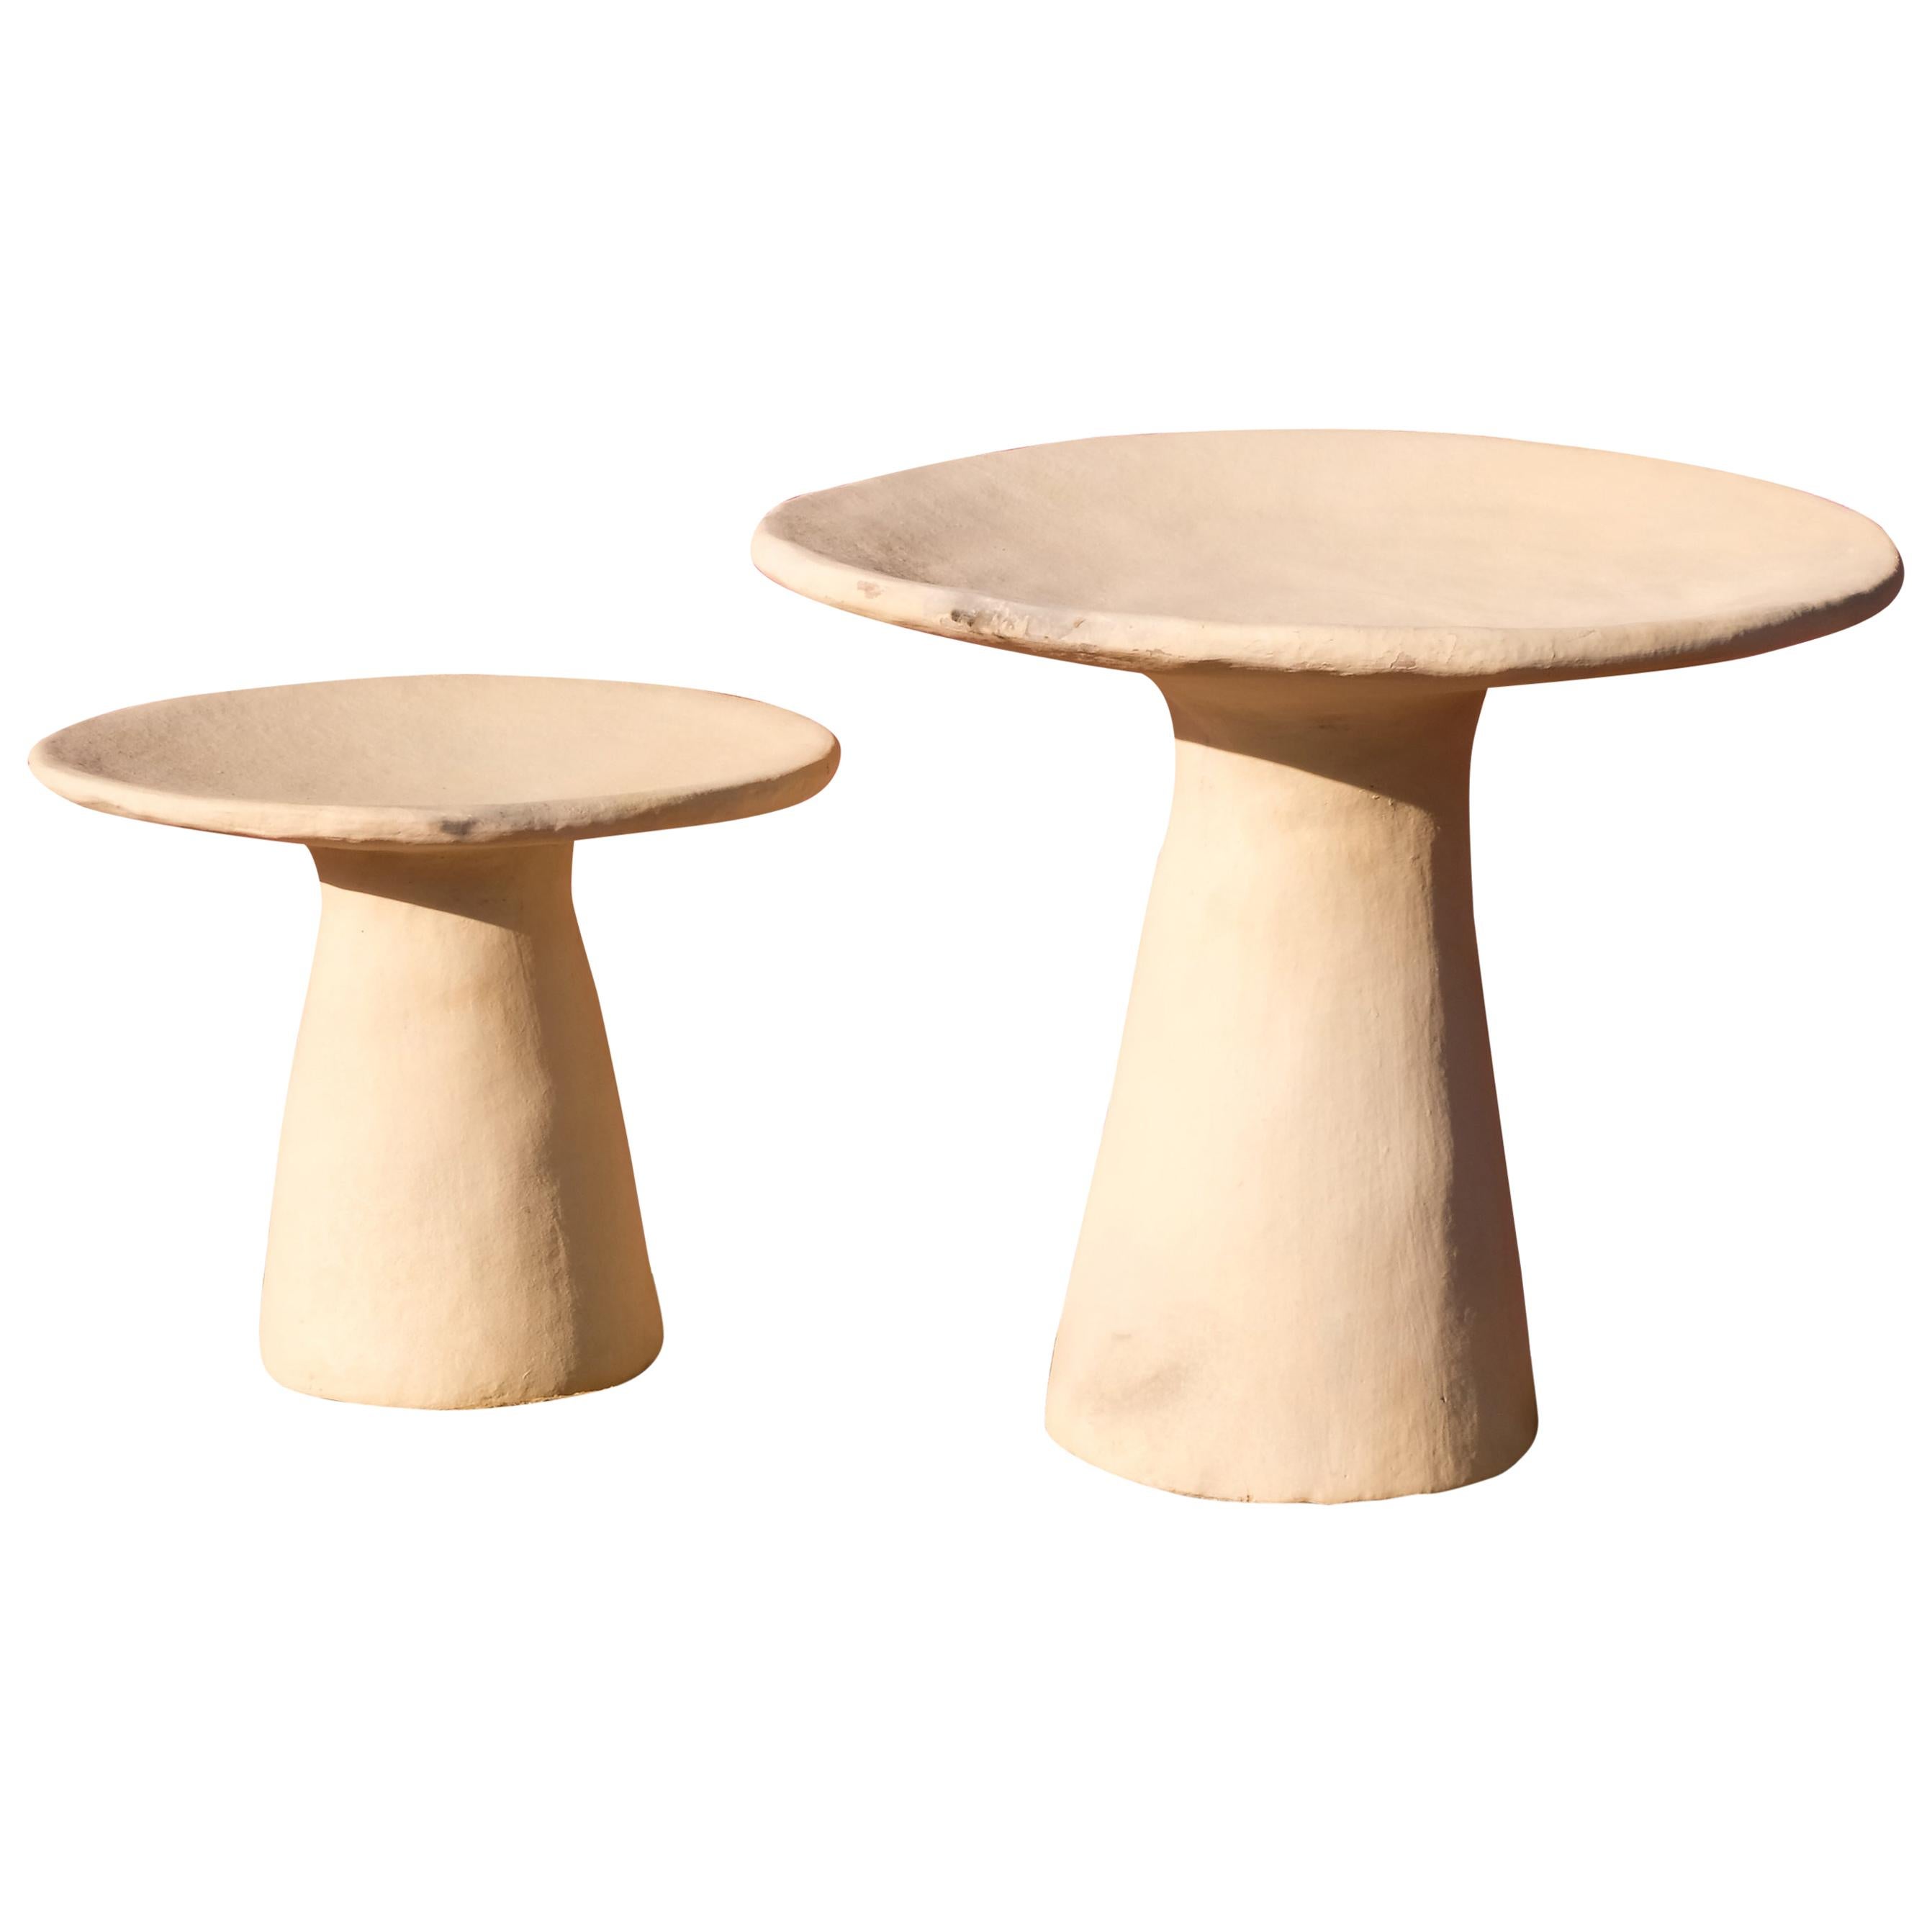 Jbel Zucar White Side Tables Made of Clay, Handcrafted by the Potter Houda